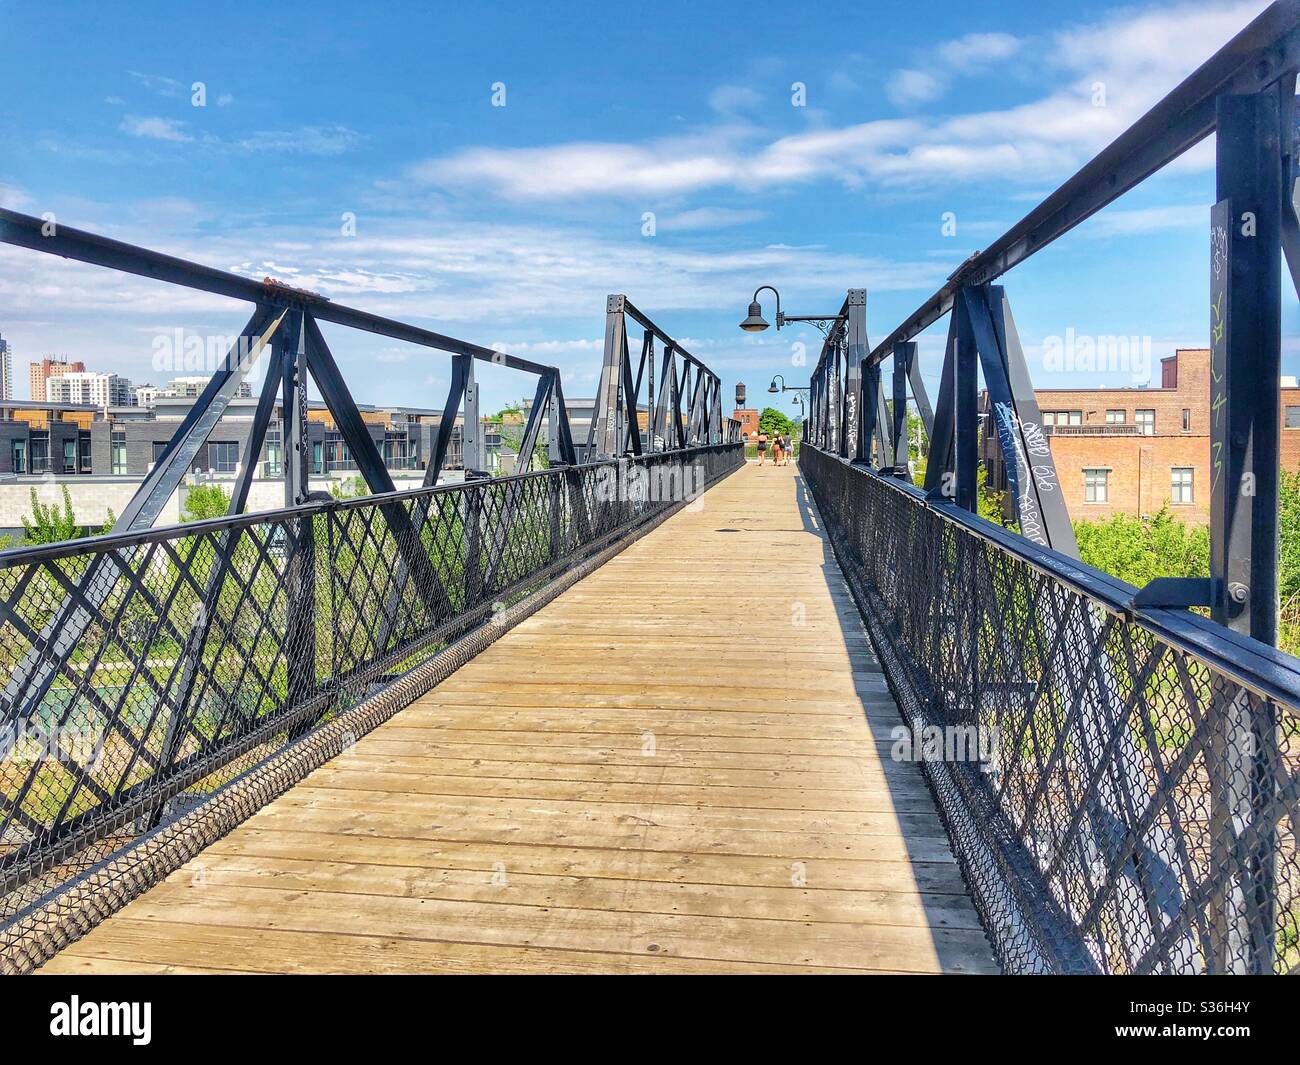 Walking over a wooden and metal bridge. Stock Photo